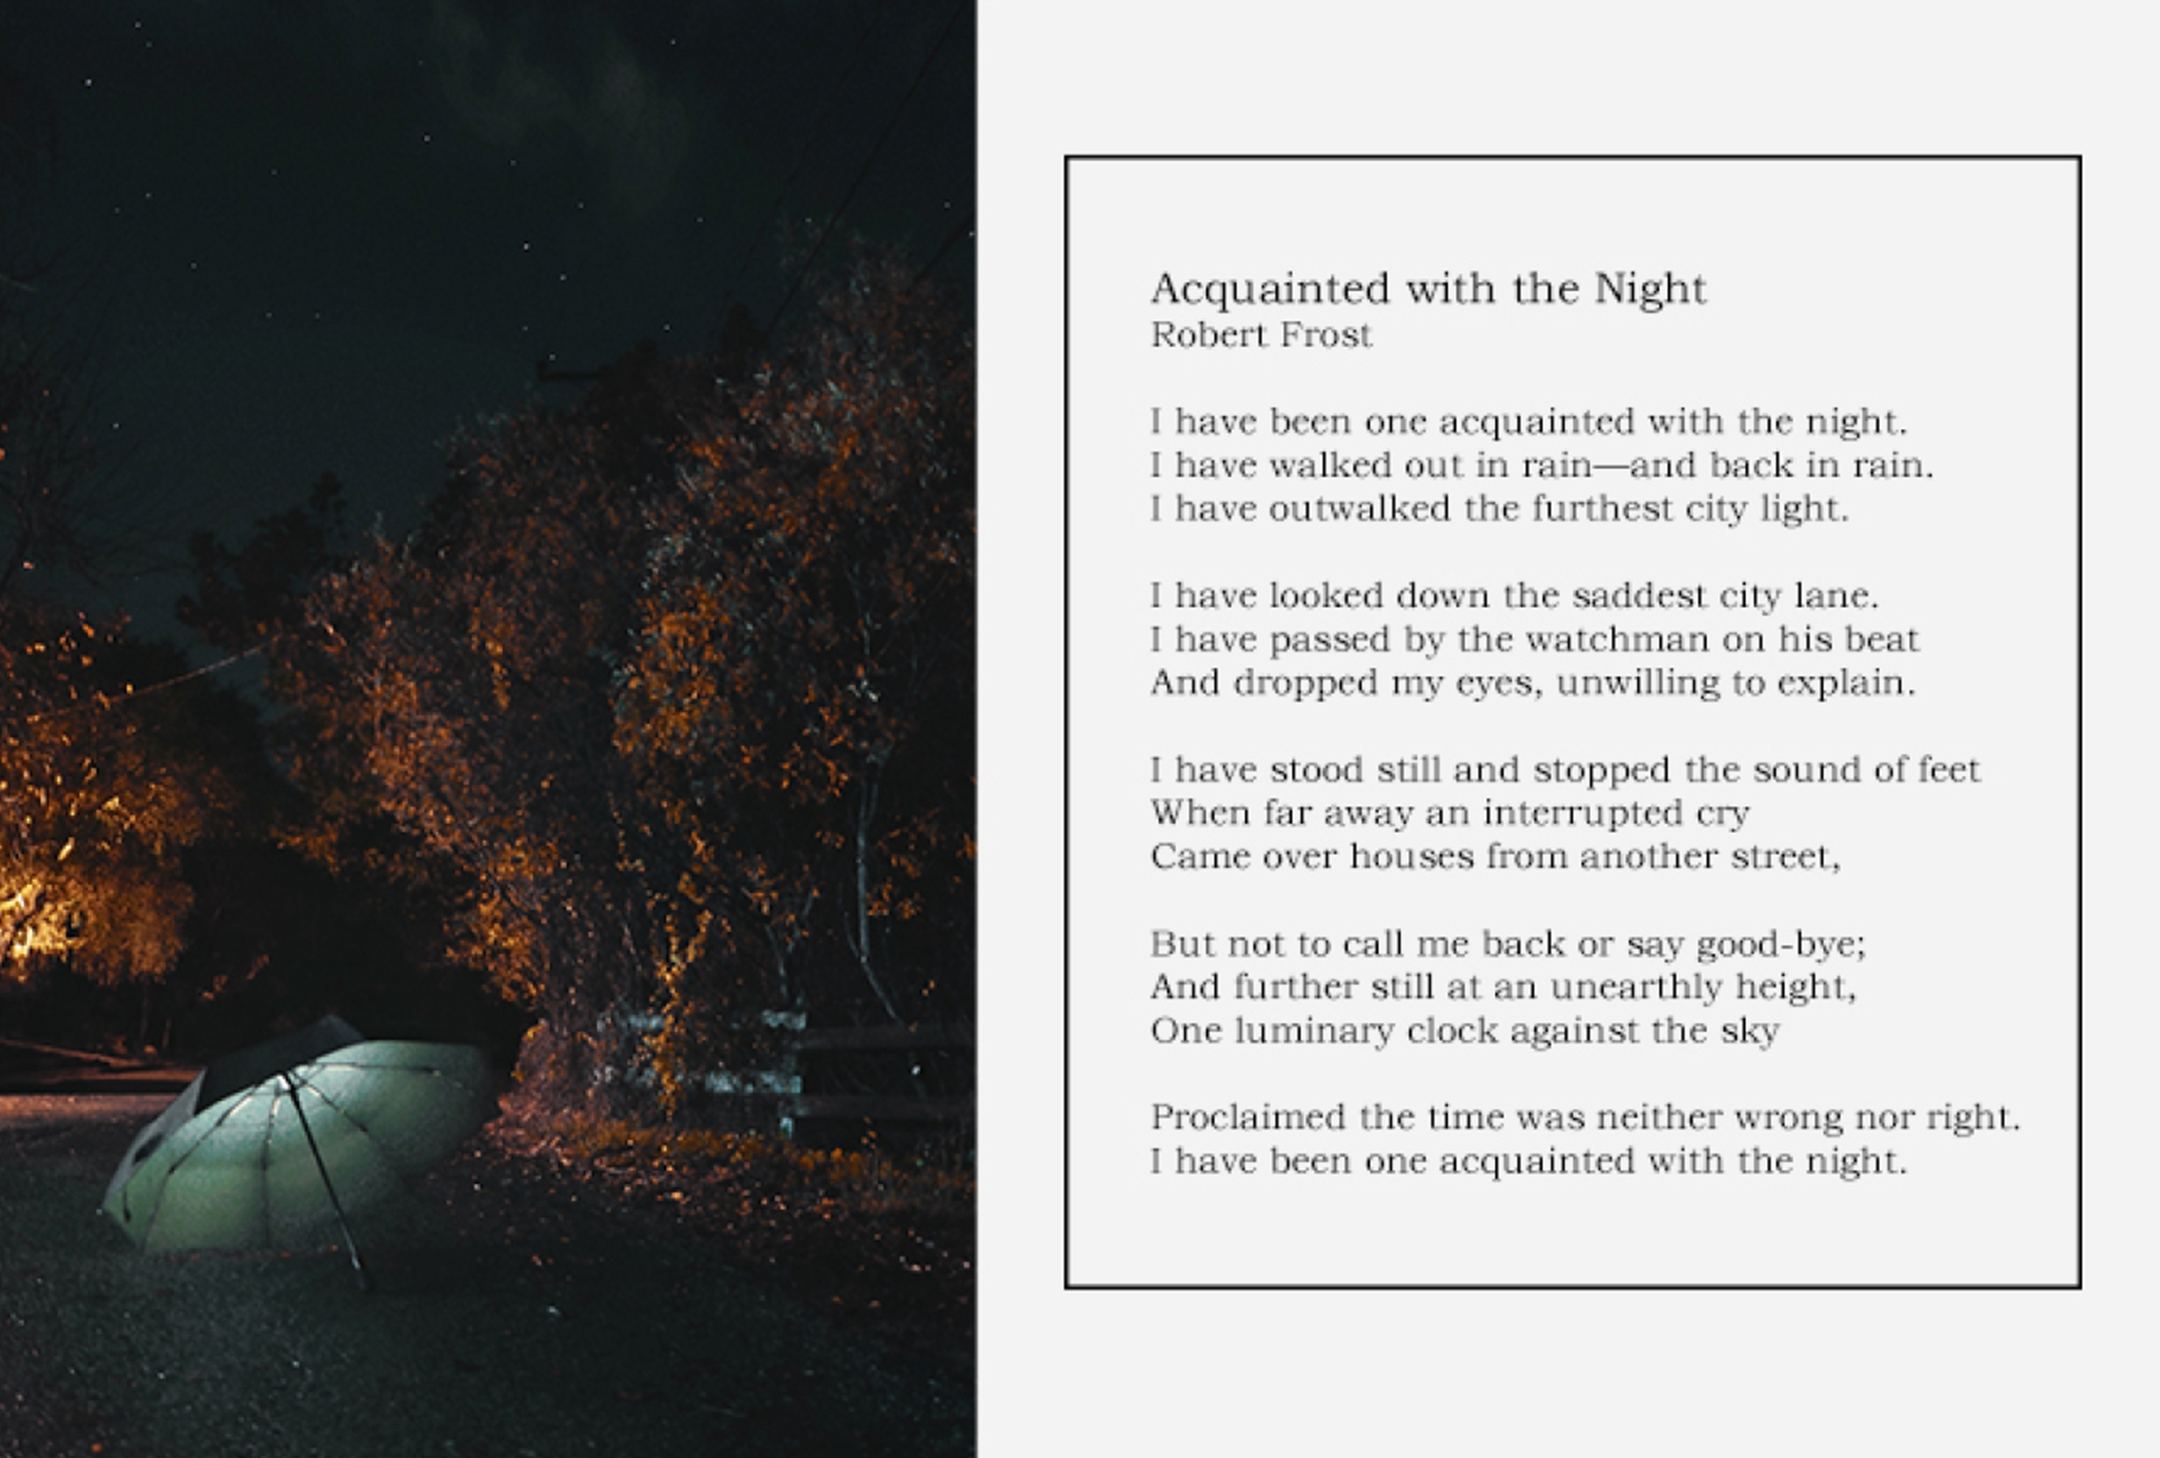 Photograph of a dark, tree-lined street with an open umbrella left on the road, placed to the left of a written poem